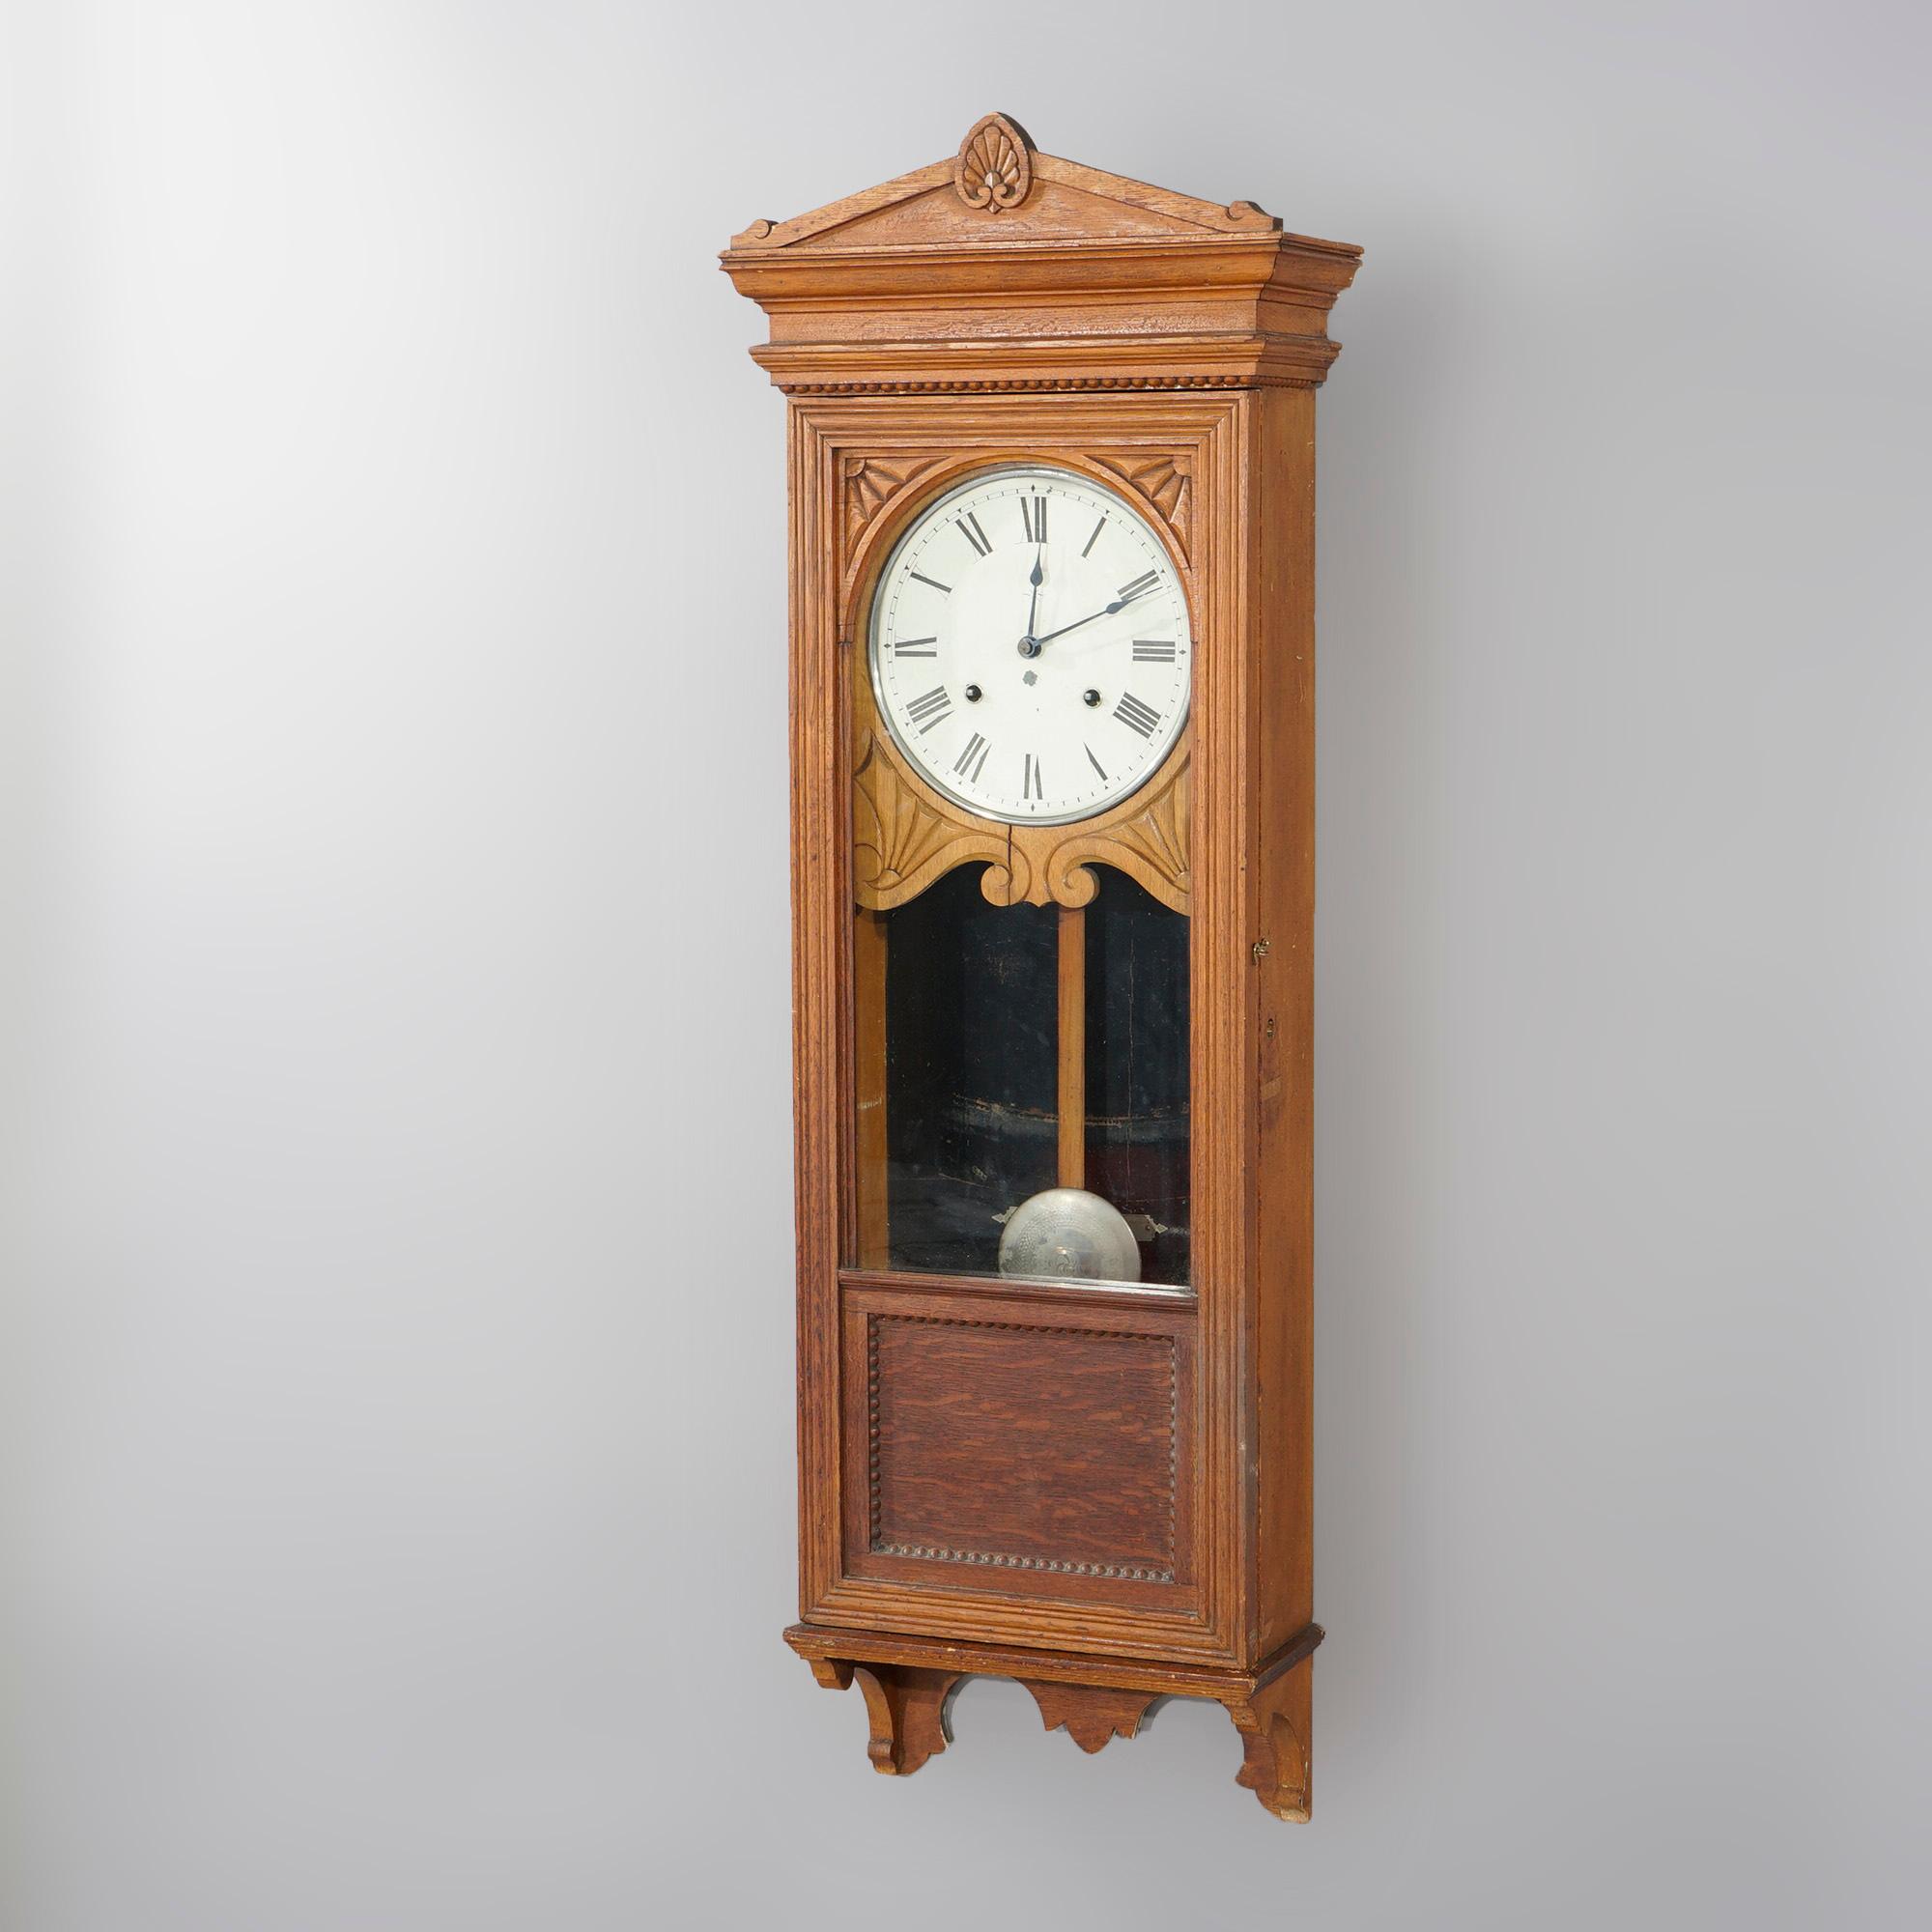 An antique regulator wall clock by Seth Thomas offers oak case with architectural form having central stylized carved shell, sunburst and foliate elements, c1900

Measures- 50.5''H x 17''W x 7.5''D.